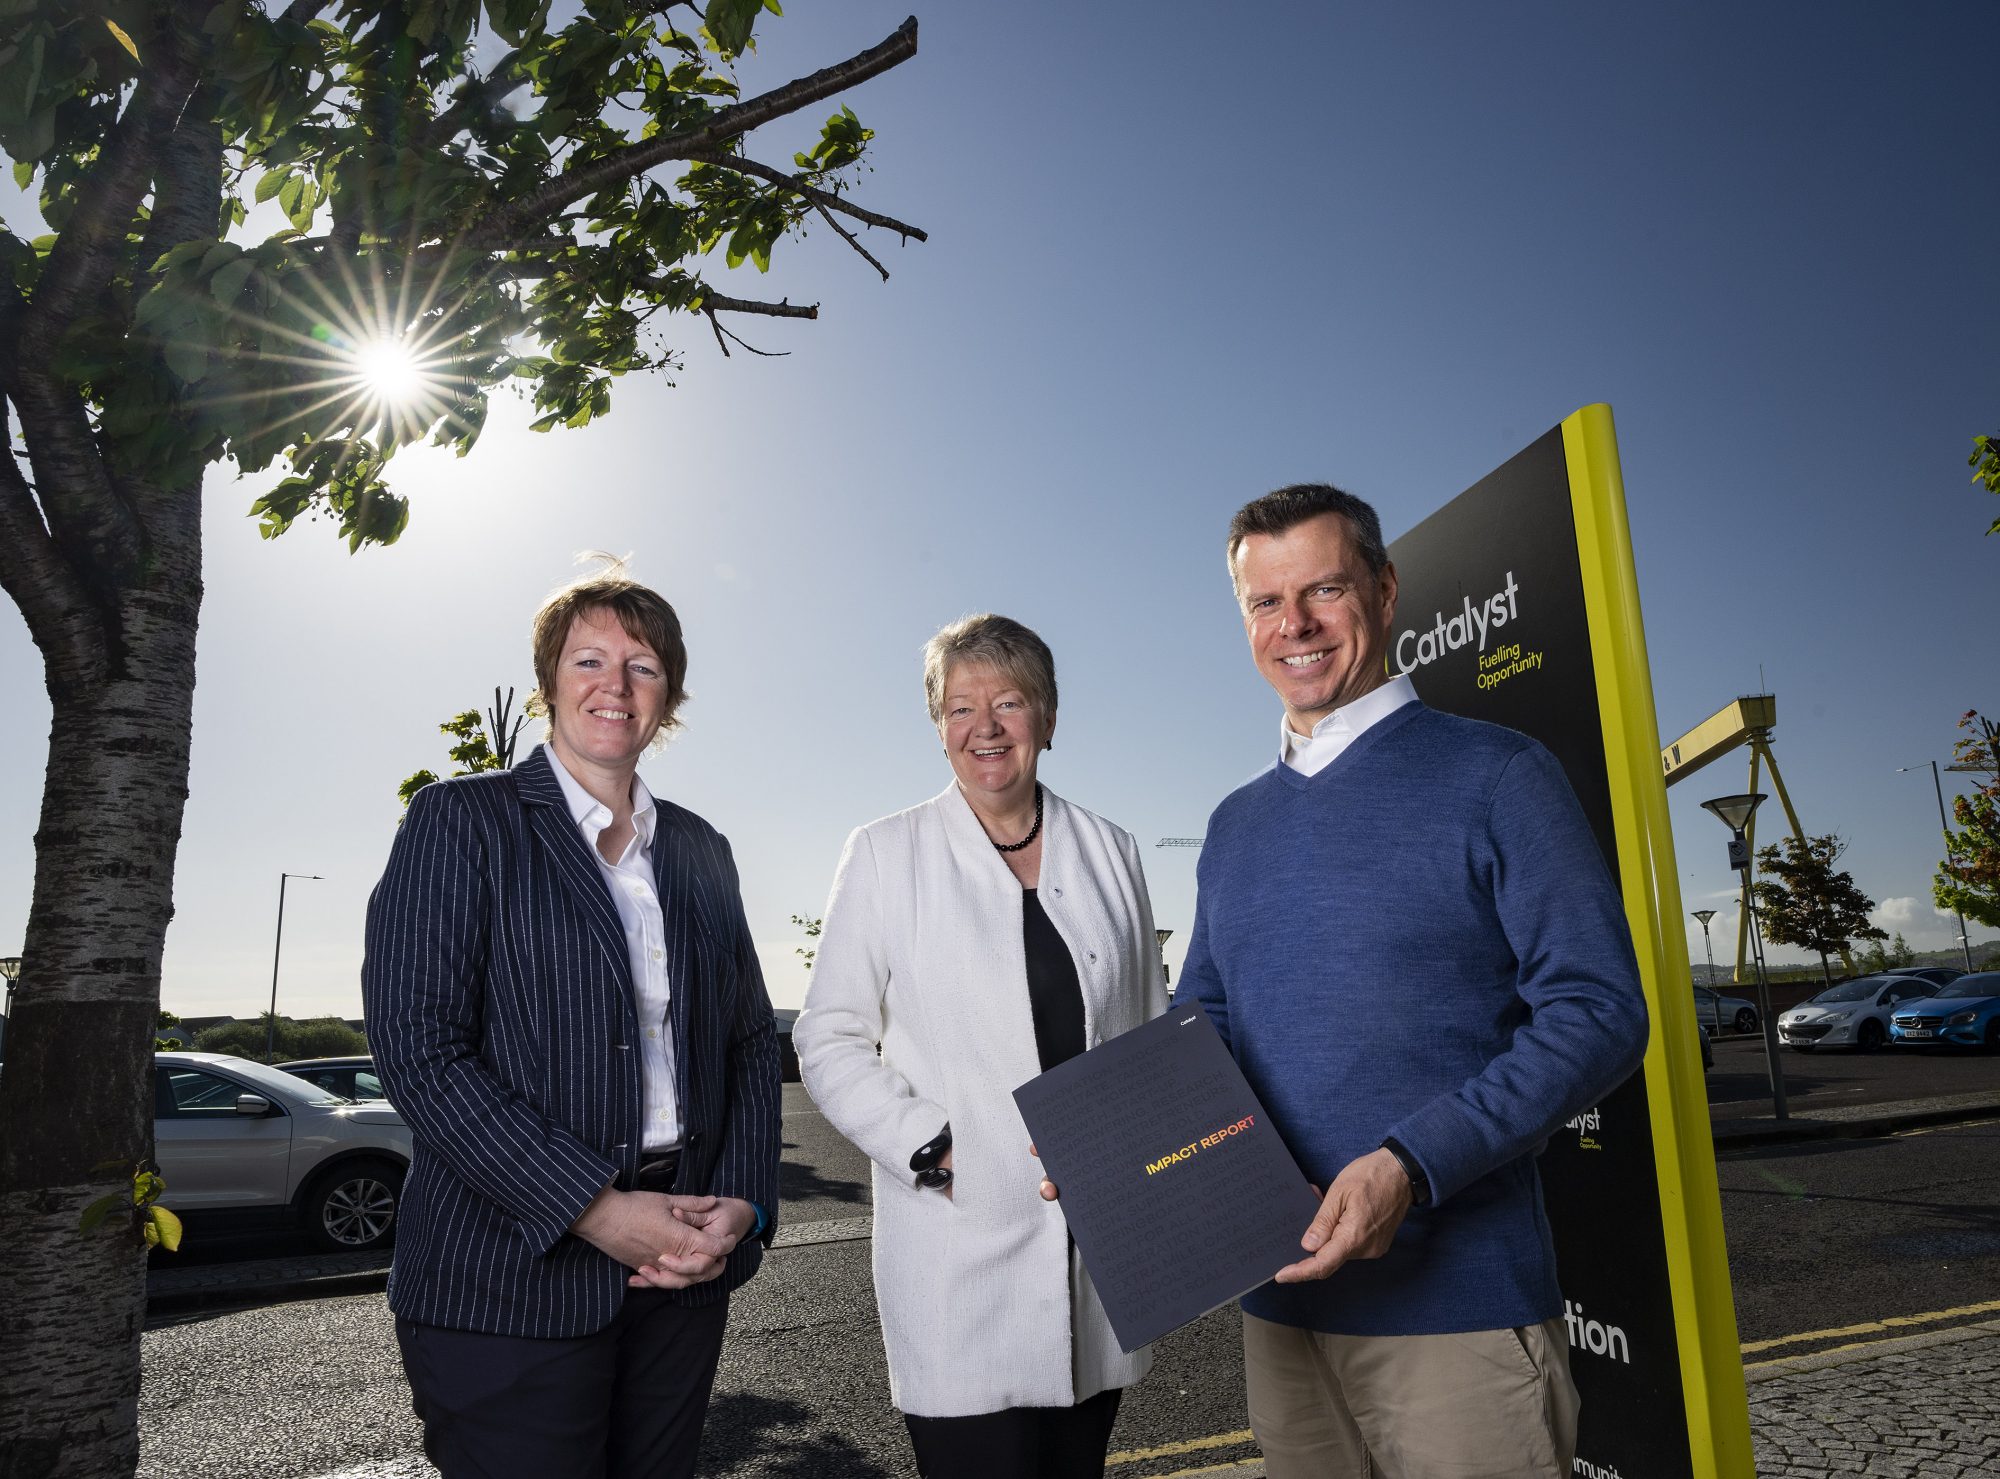 Guest speaker Helen McCarthy, CEO of pHion Therapeutics, Catalyst Chair Ellvena Graham and Catalyst CEO Steve Orr are pictured ahead of an event to launch Catalyst’s Impact Report and five year strategy.